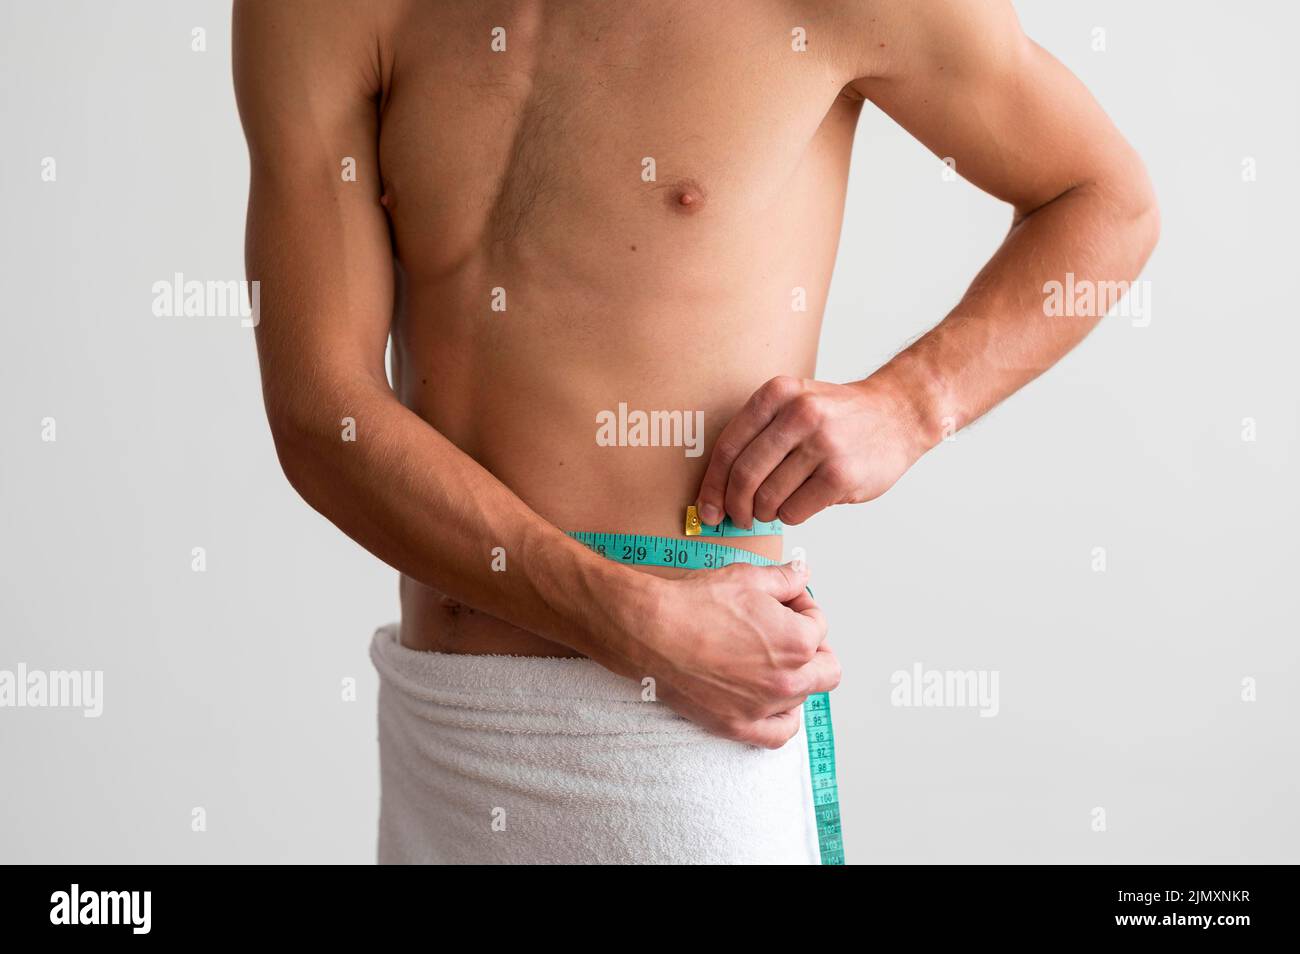 Front view shirtless man measuring his waste with tape Stock Photo